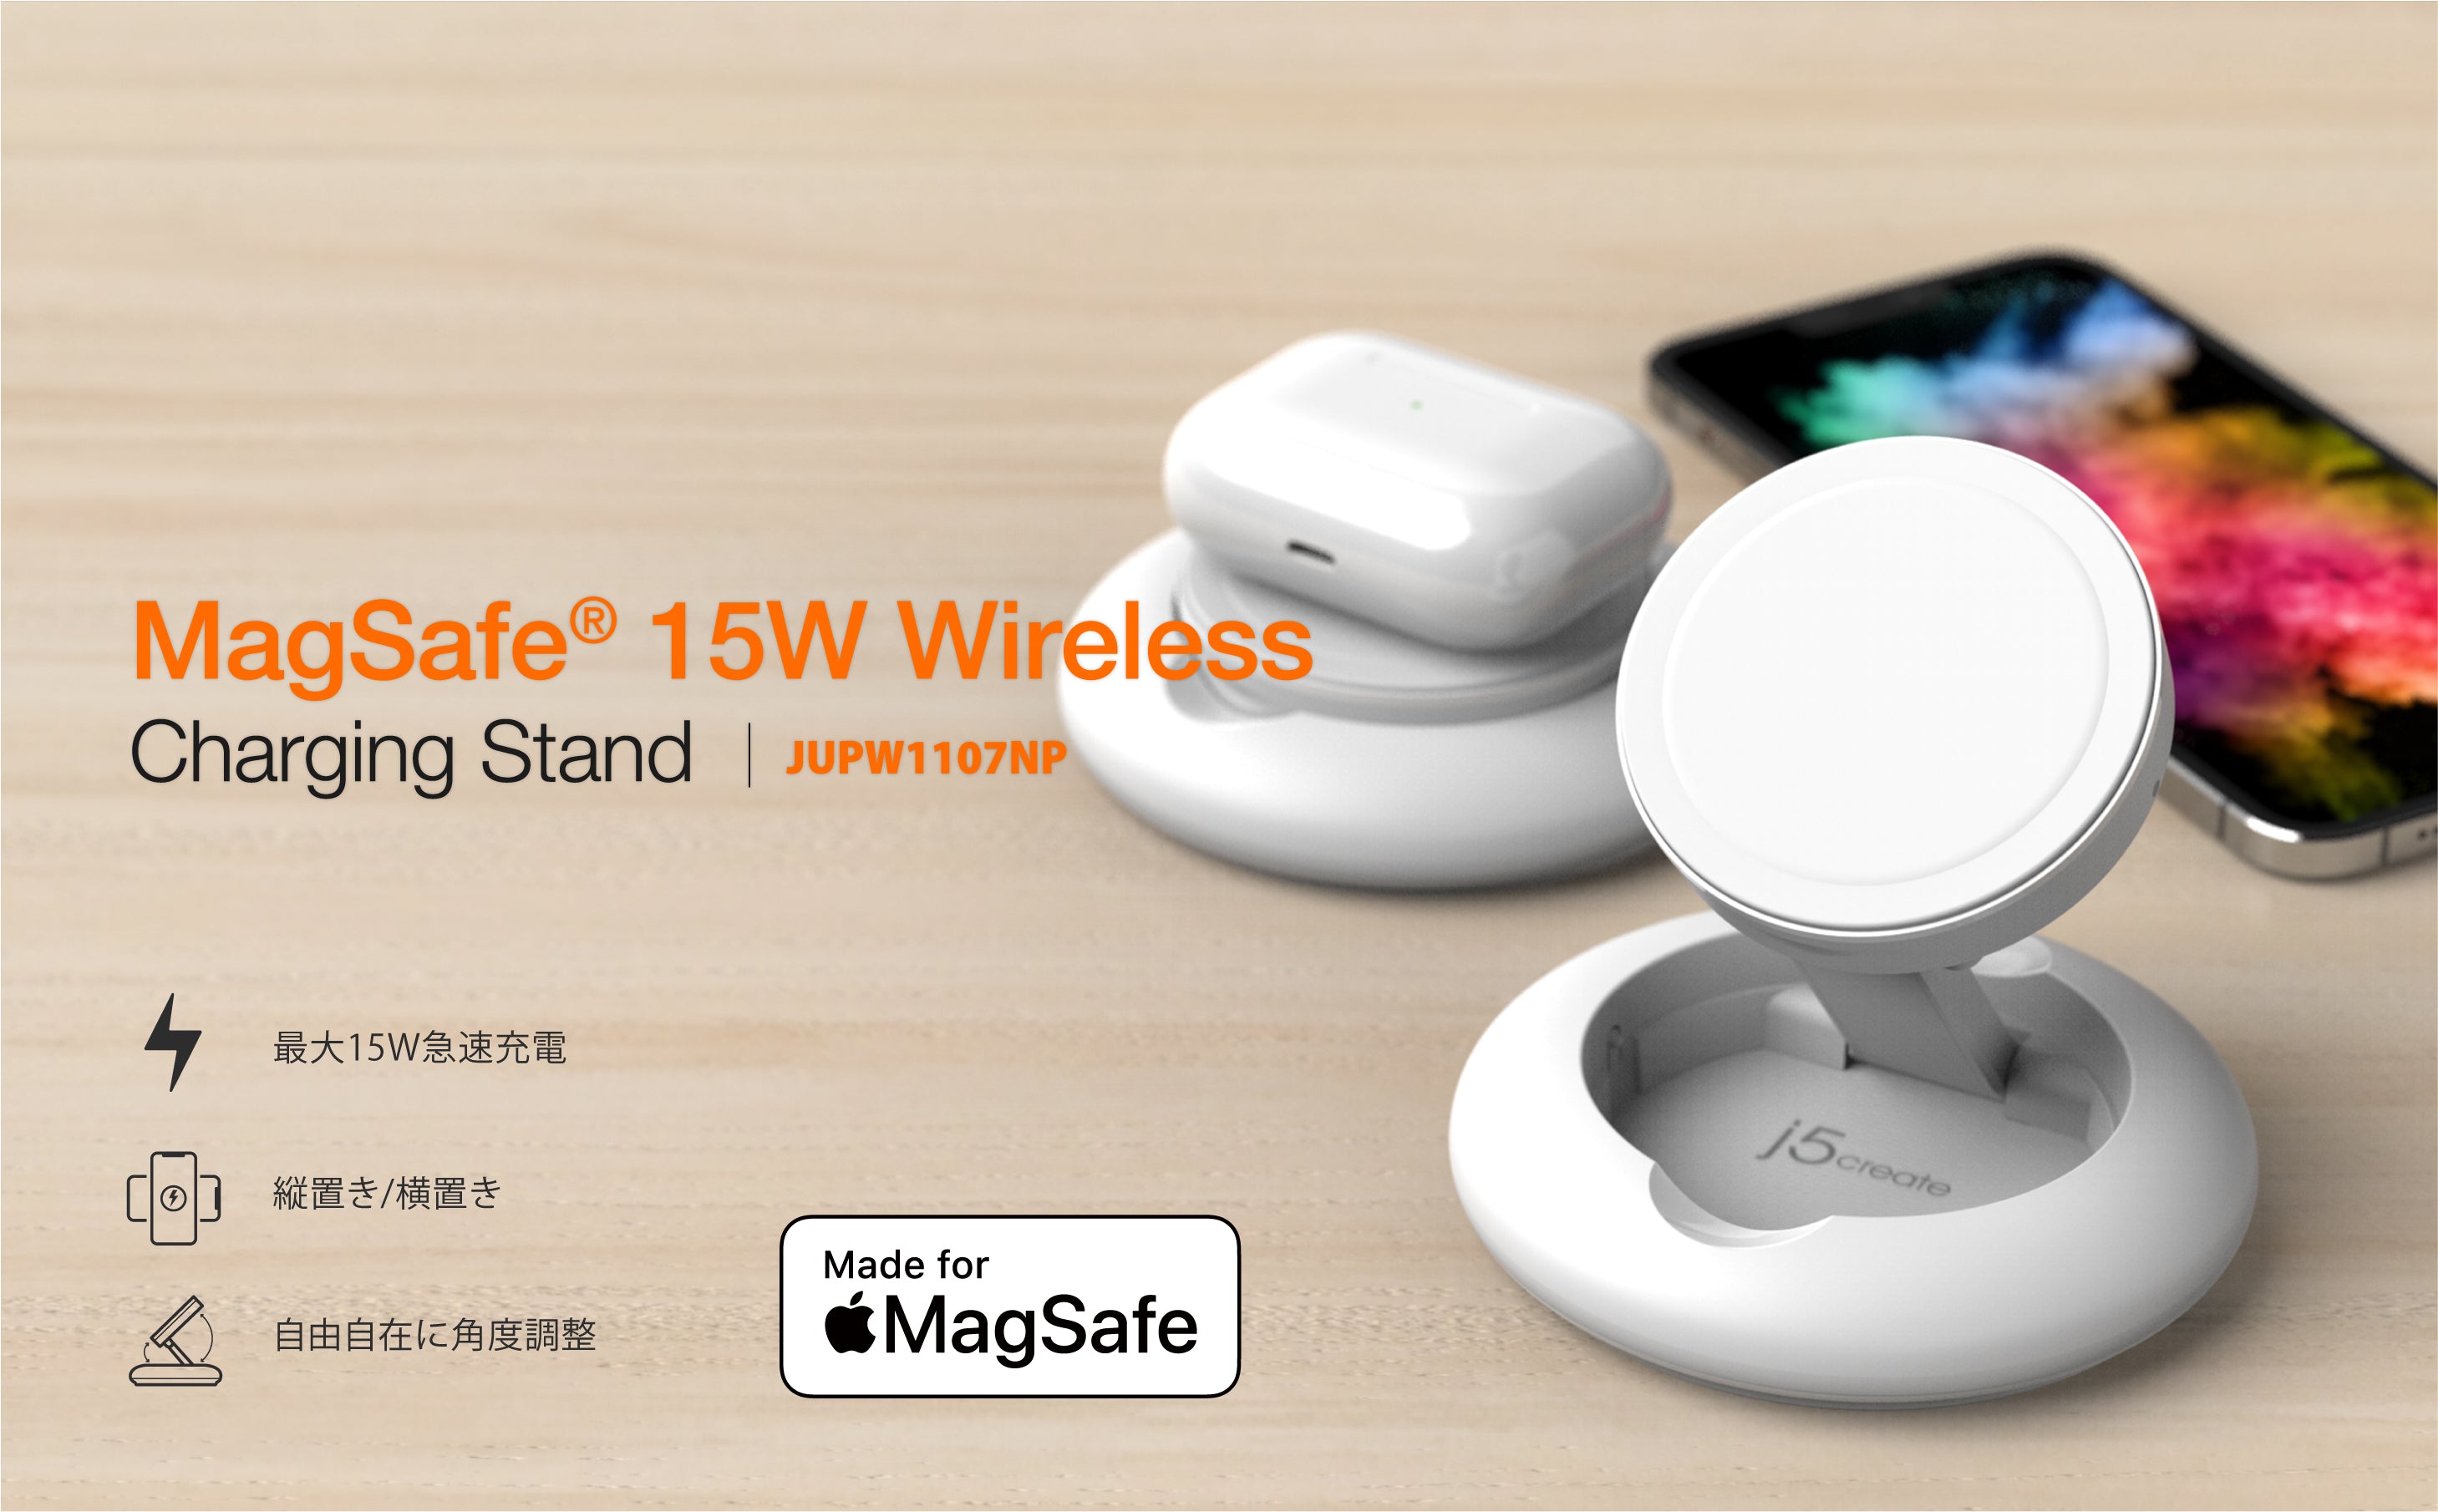 j5create、Made for MagSafe認証取得のワイヤレス充電器などを発売